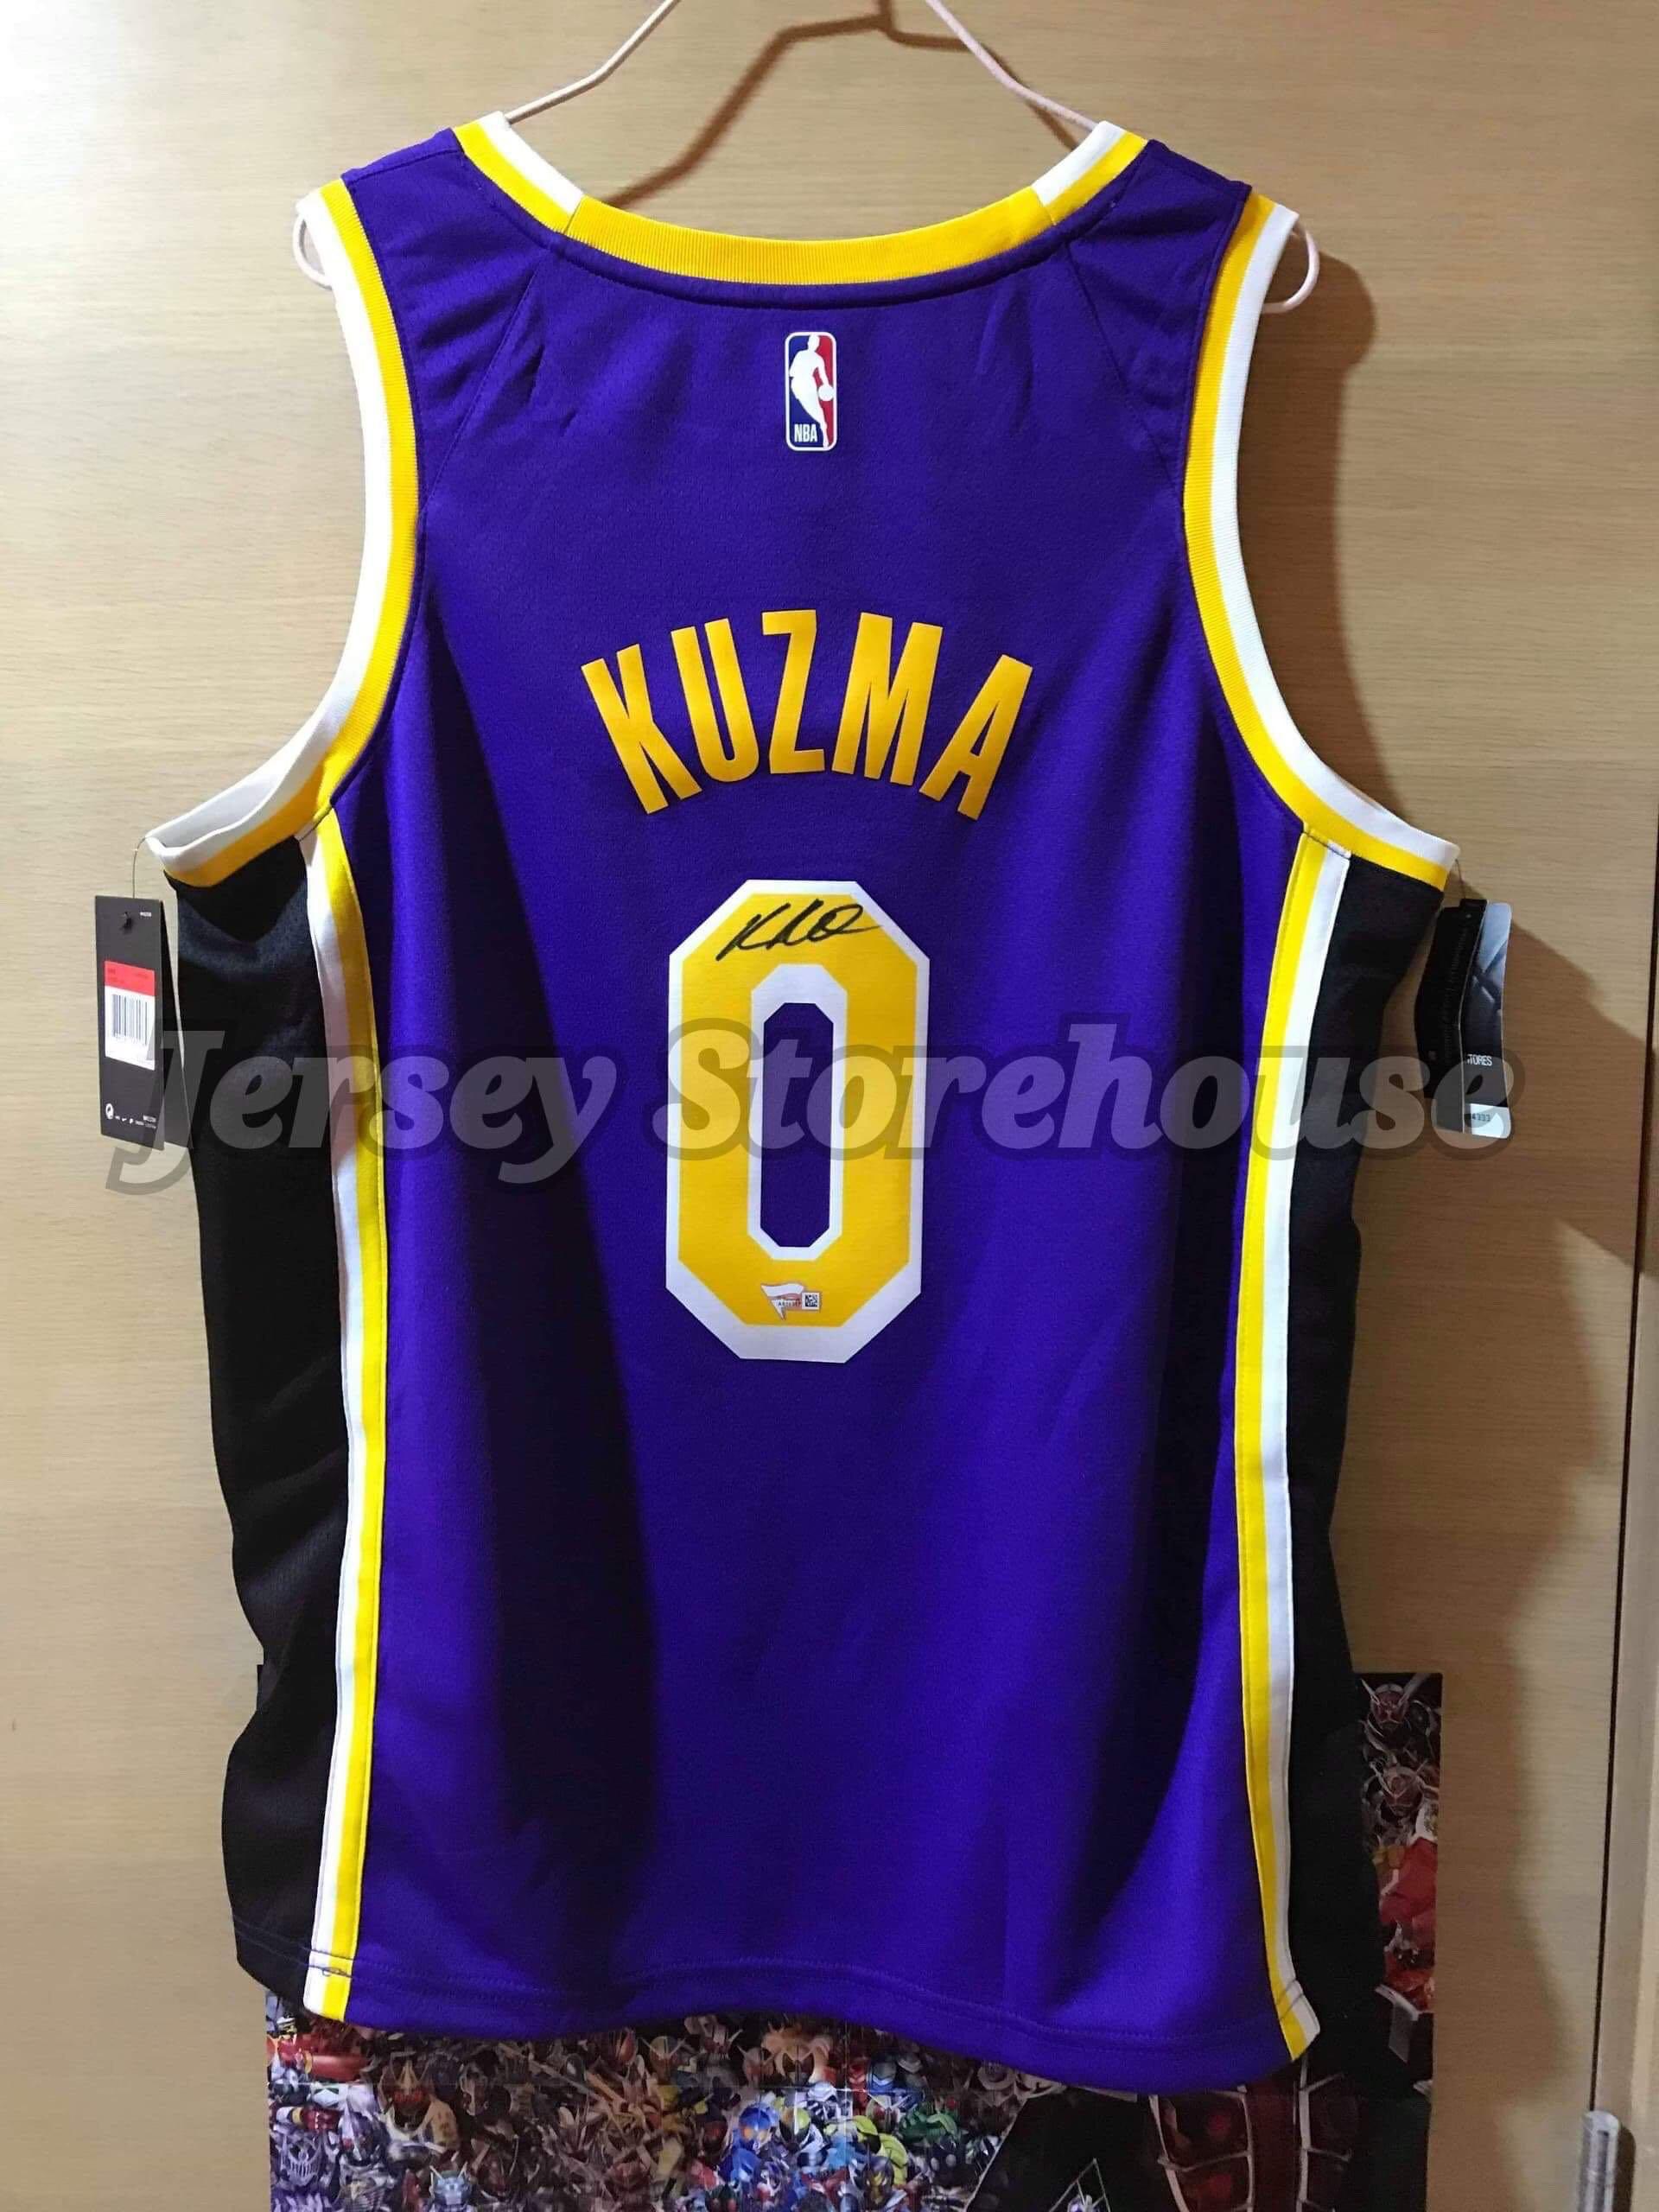 los angeles lakers official jersey